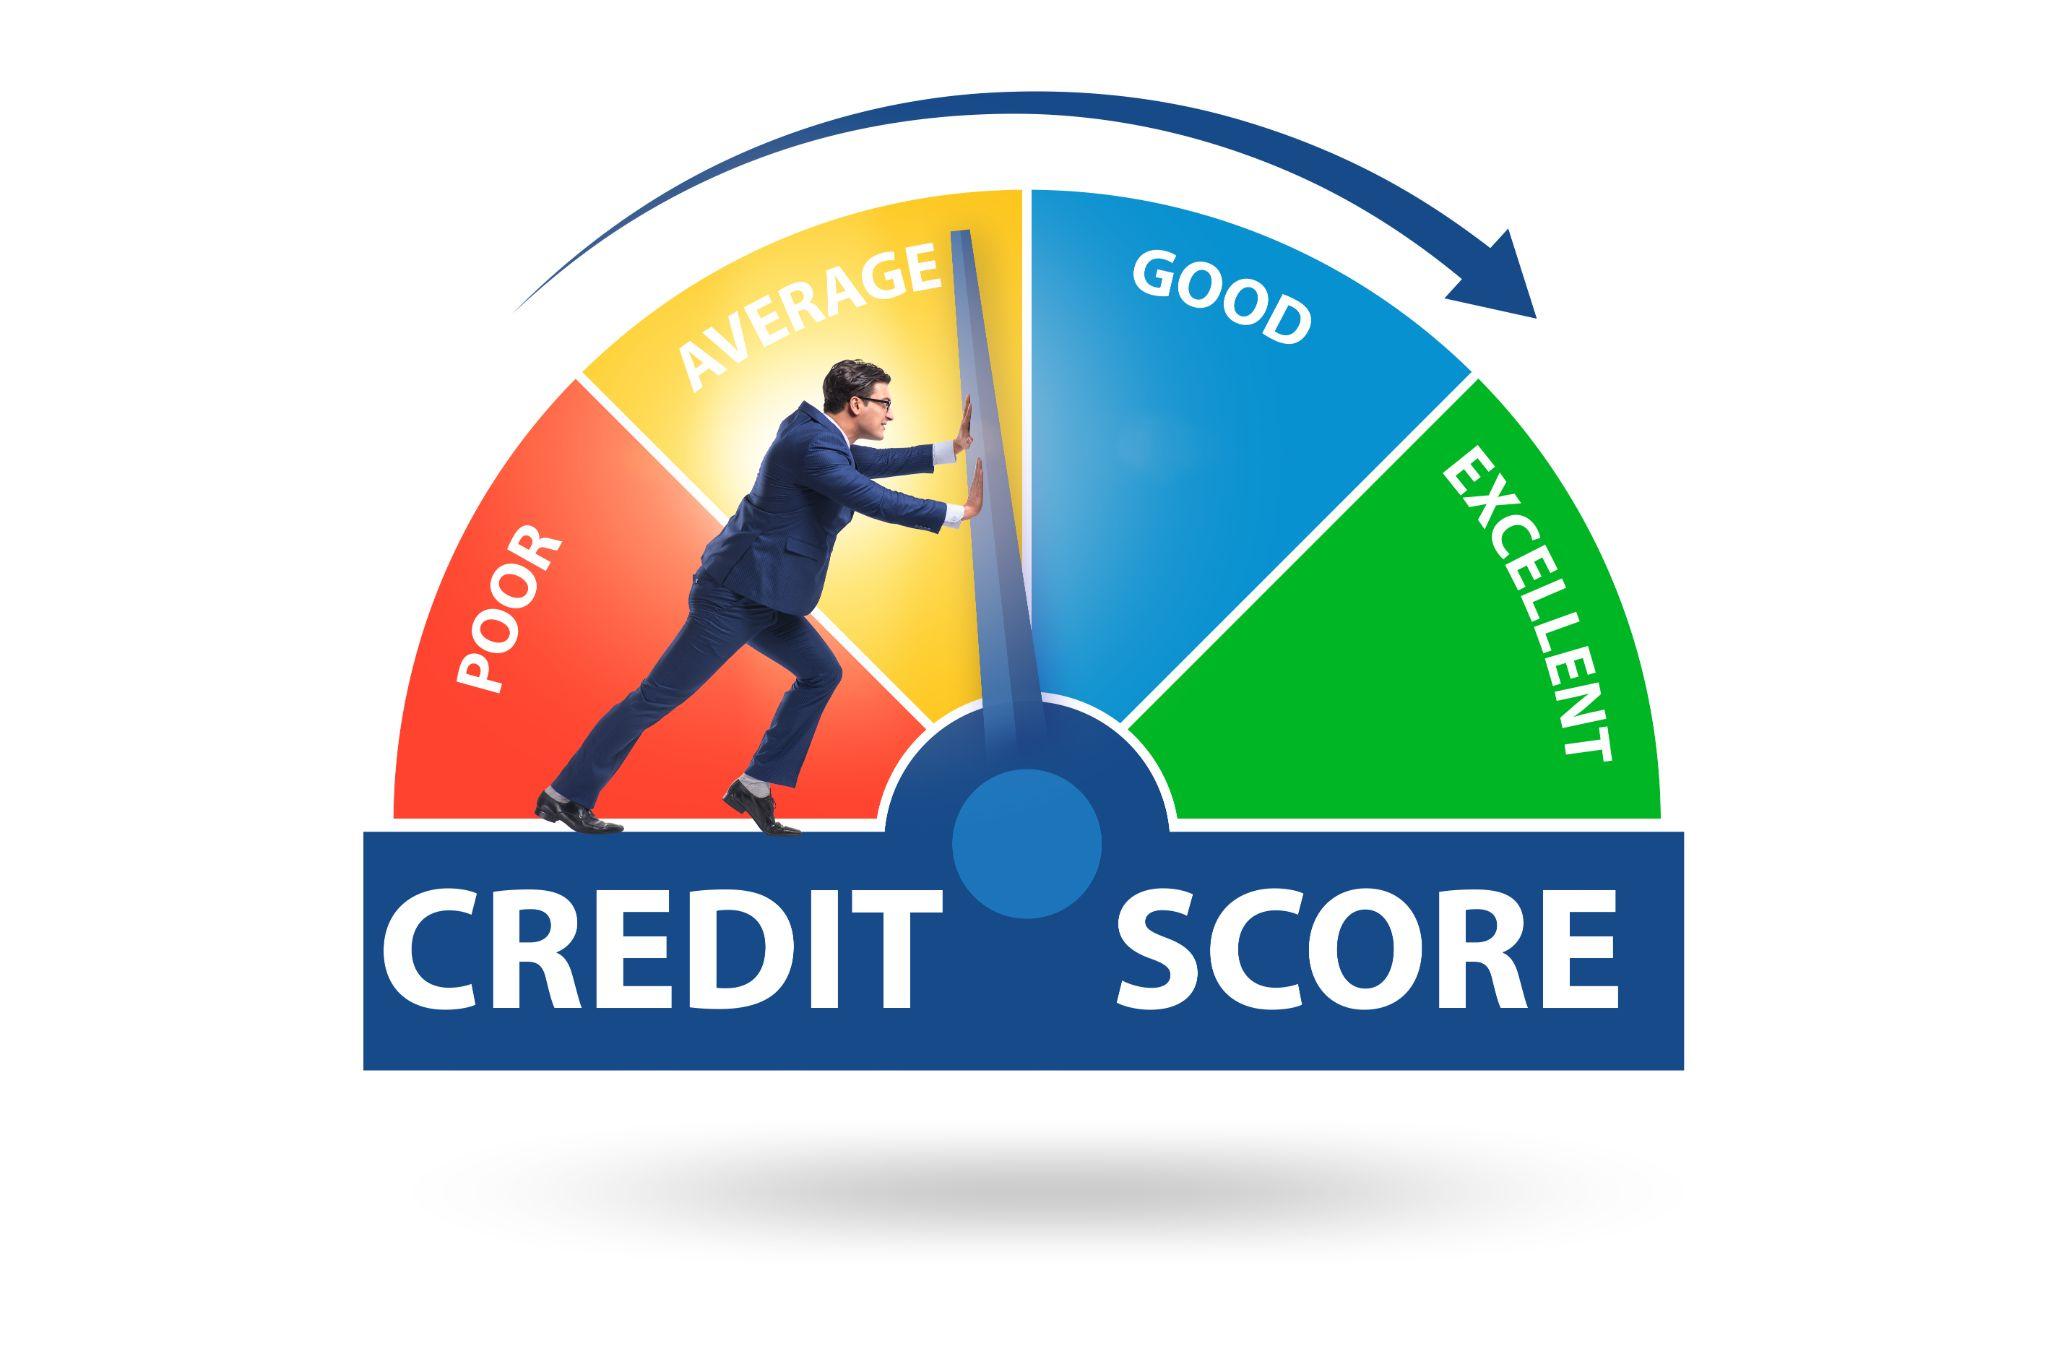 Businessman trying to improve credit score